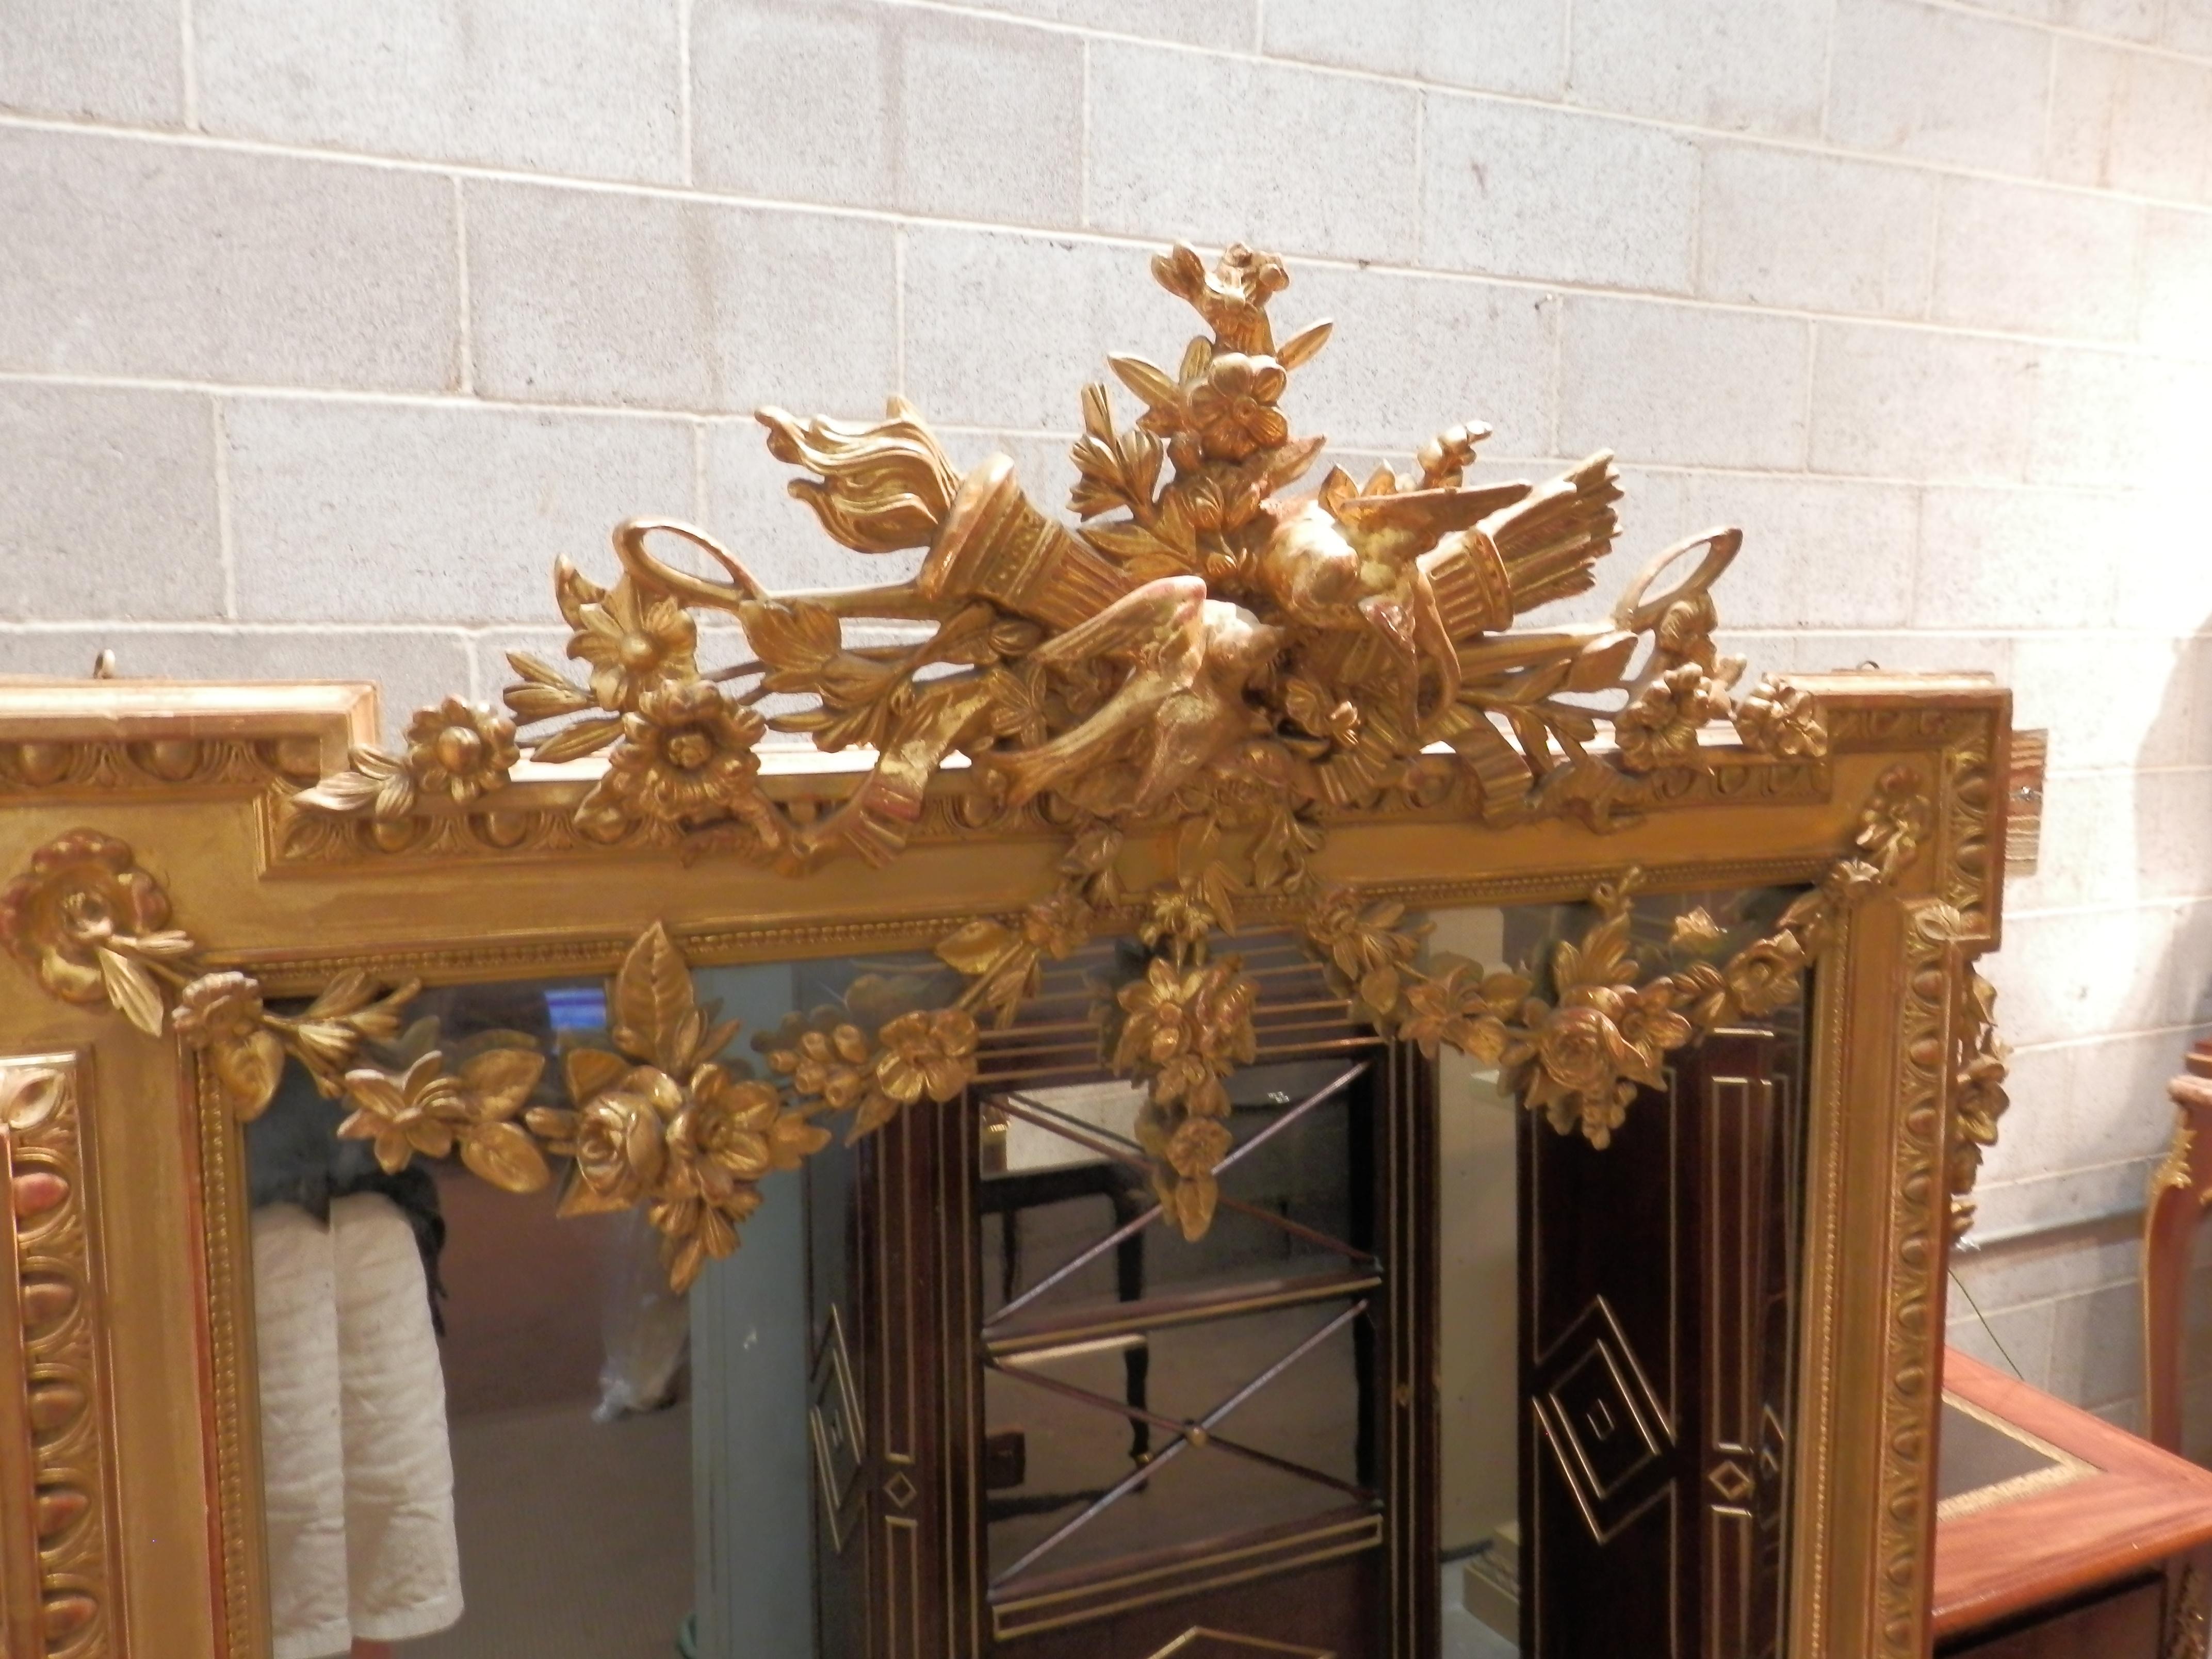 A fine French Louis XVI French gilt carved wall mirror. Finely carved love birds and flowers with Louis XVI details referred to as a wedding mirror.